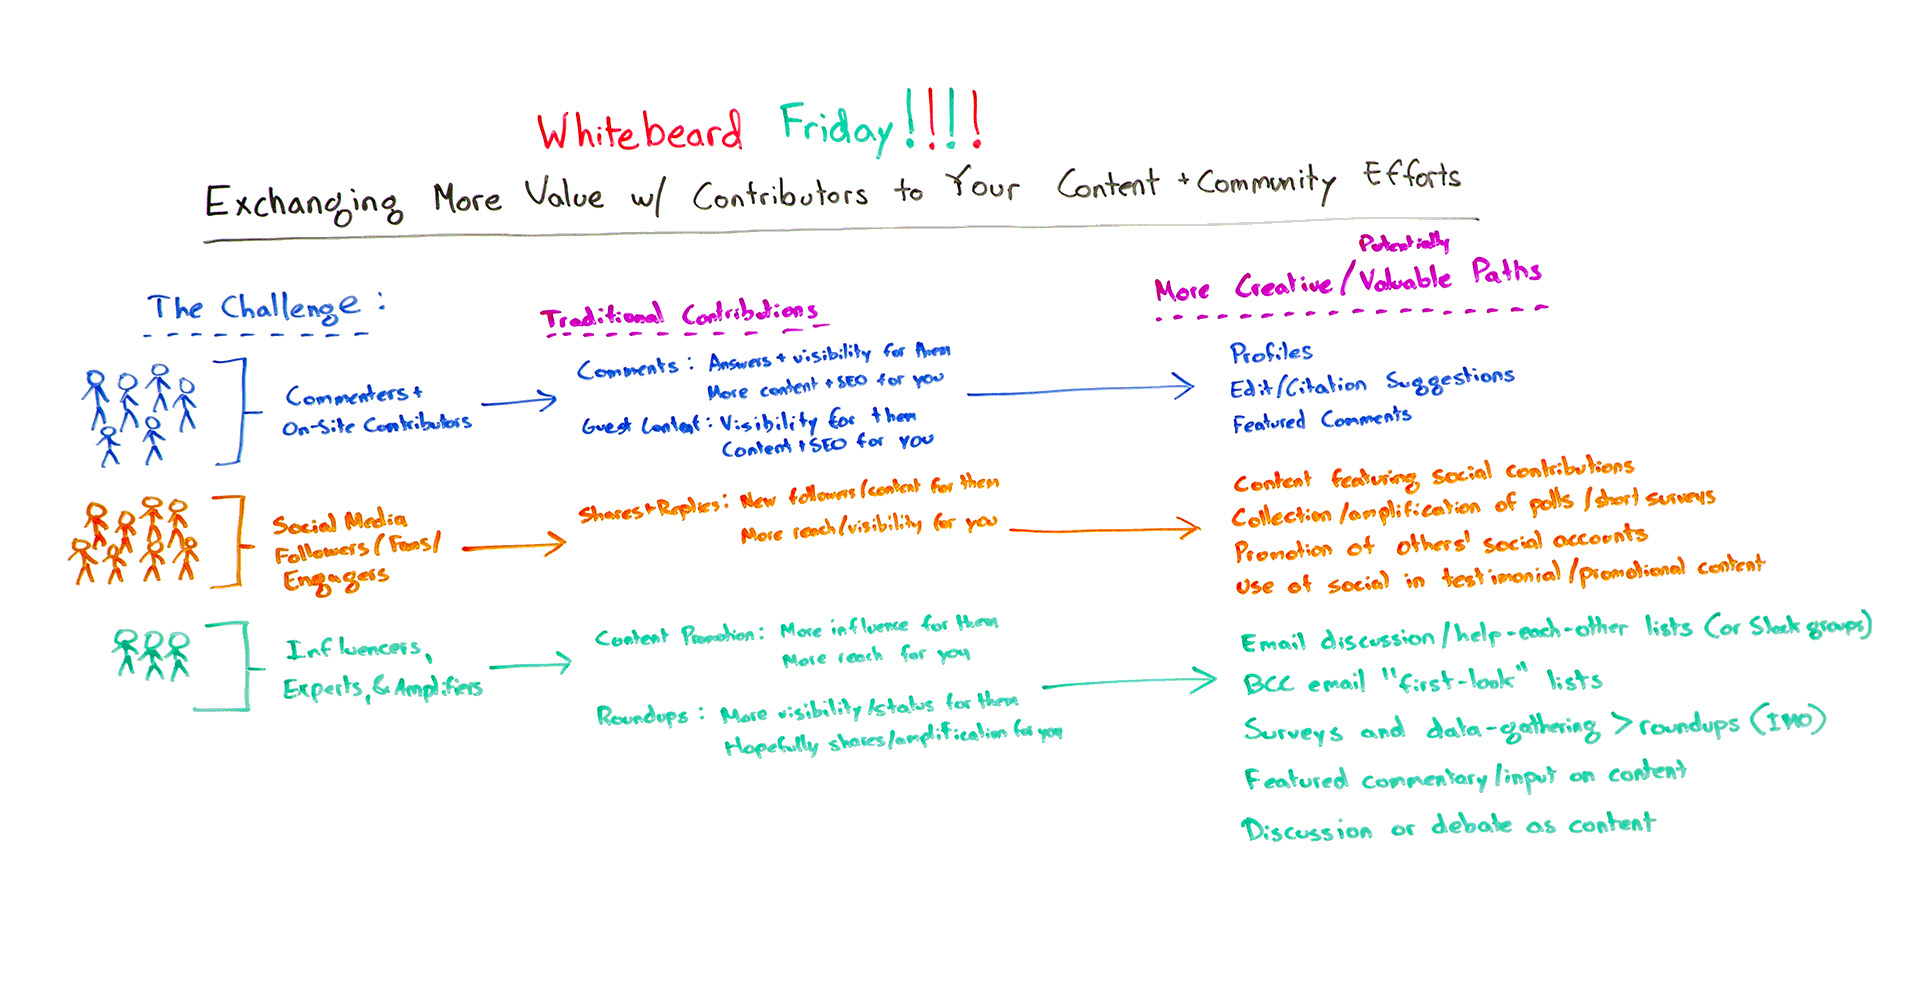 Exchanging More Value with Contributors to Your Content and Community Efforts - Whiteboard Friday